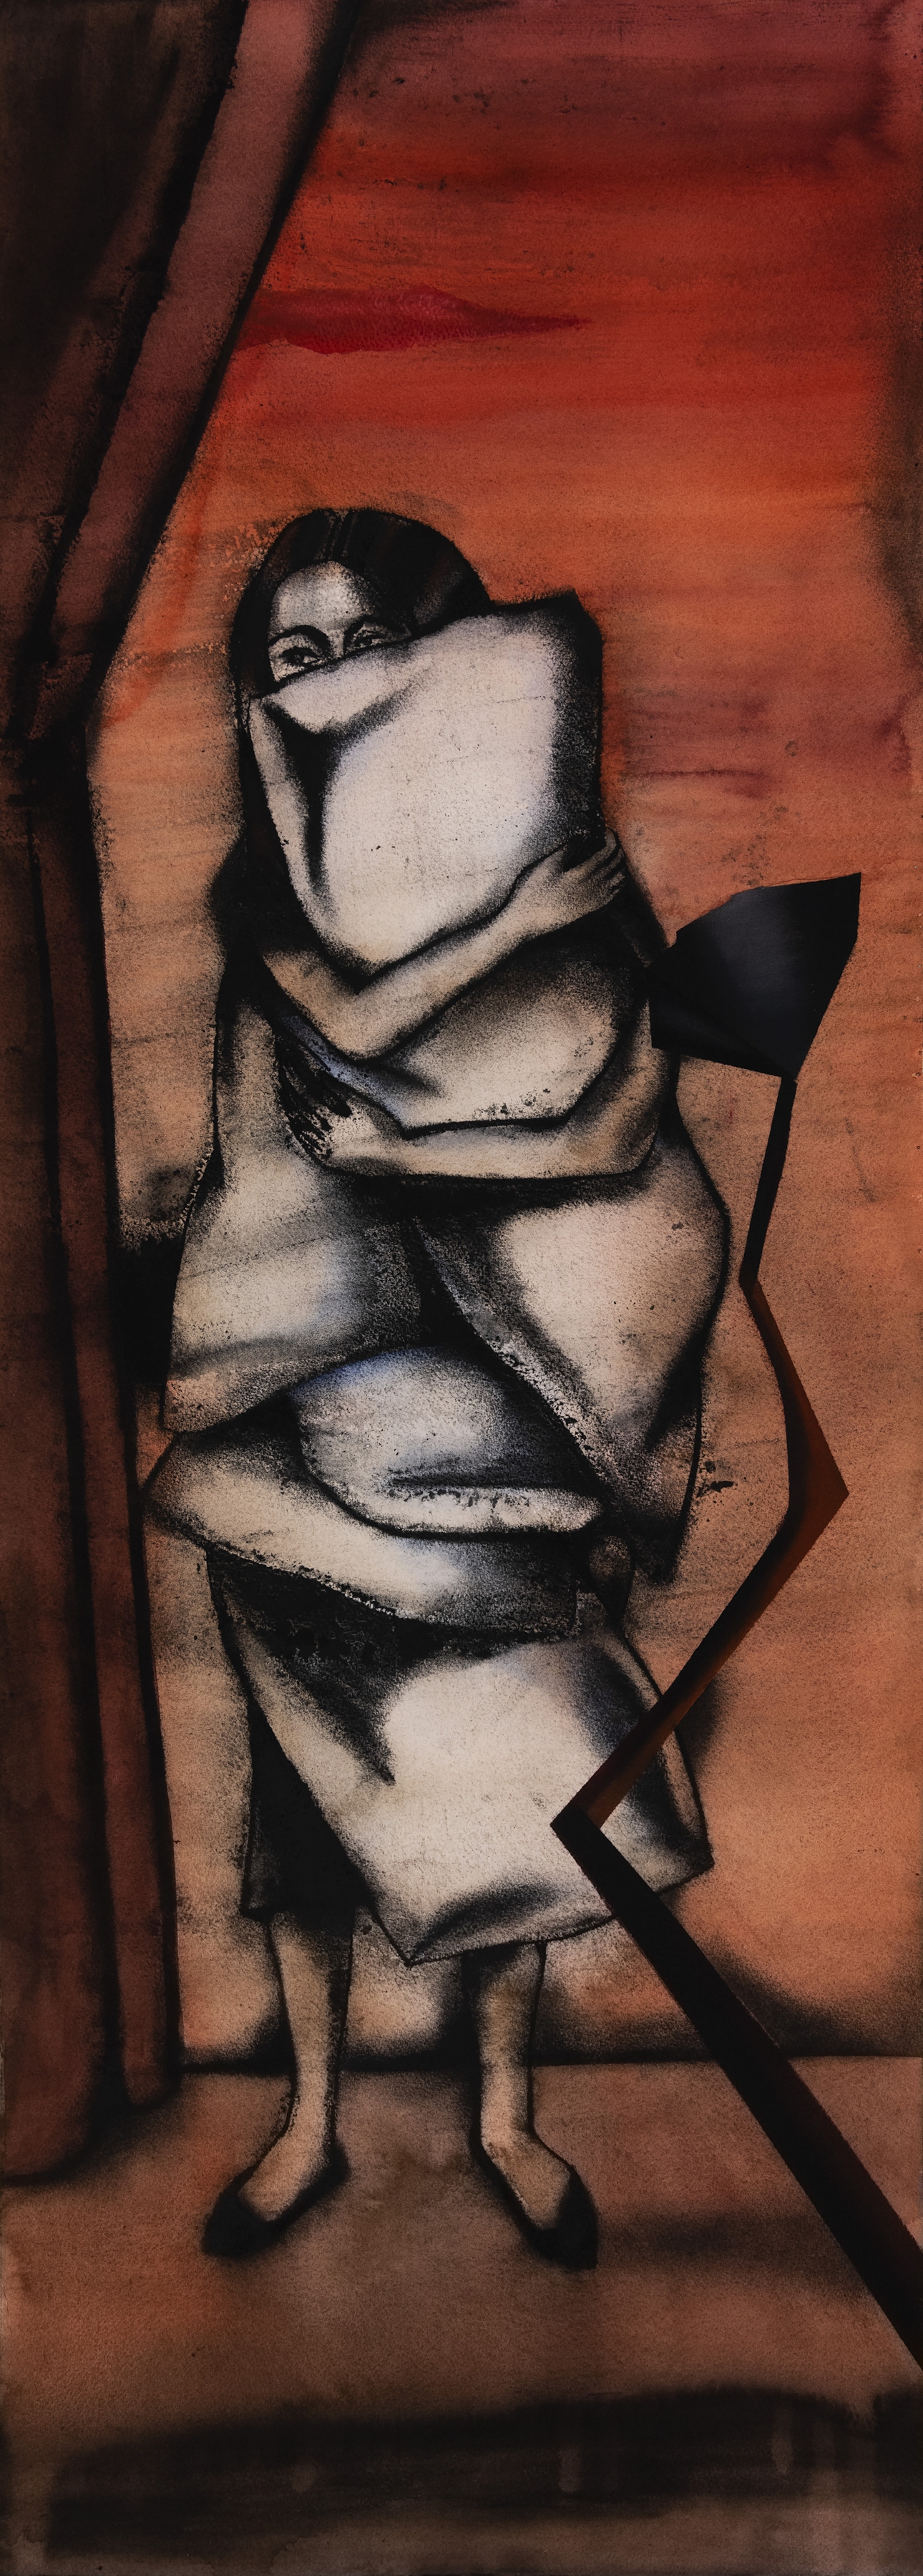 ANJU DODIYA

Pillow Bearer, 2020

Watercolour, charcoal and soft pastel on paper

44.7 x 16.7 in / 113.6 x 42.5 cm&amp;nbsp;